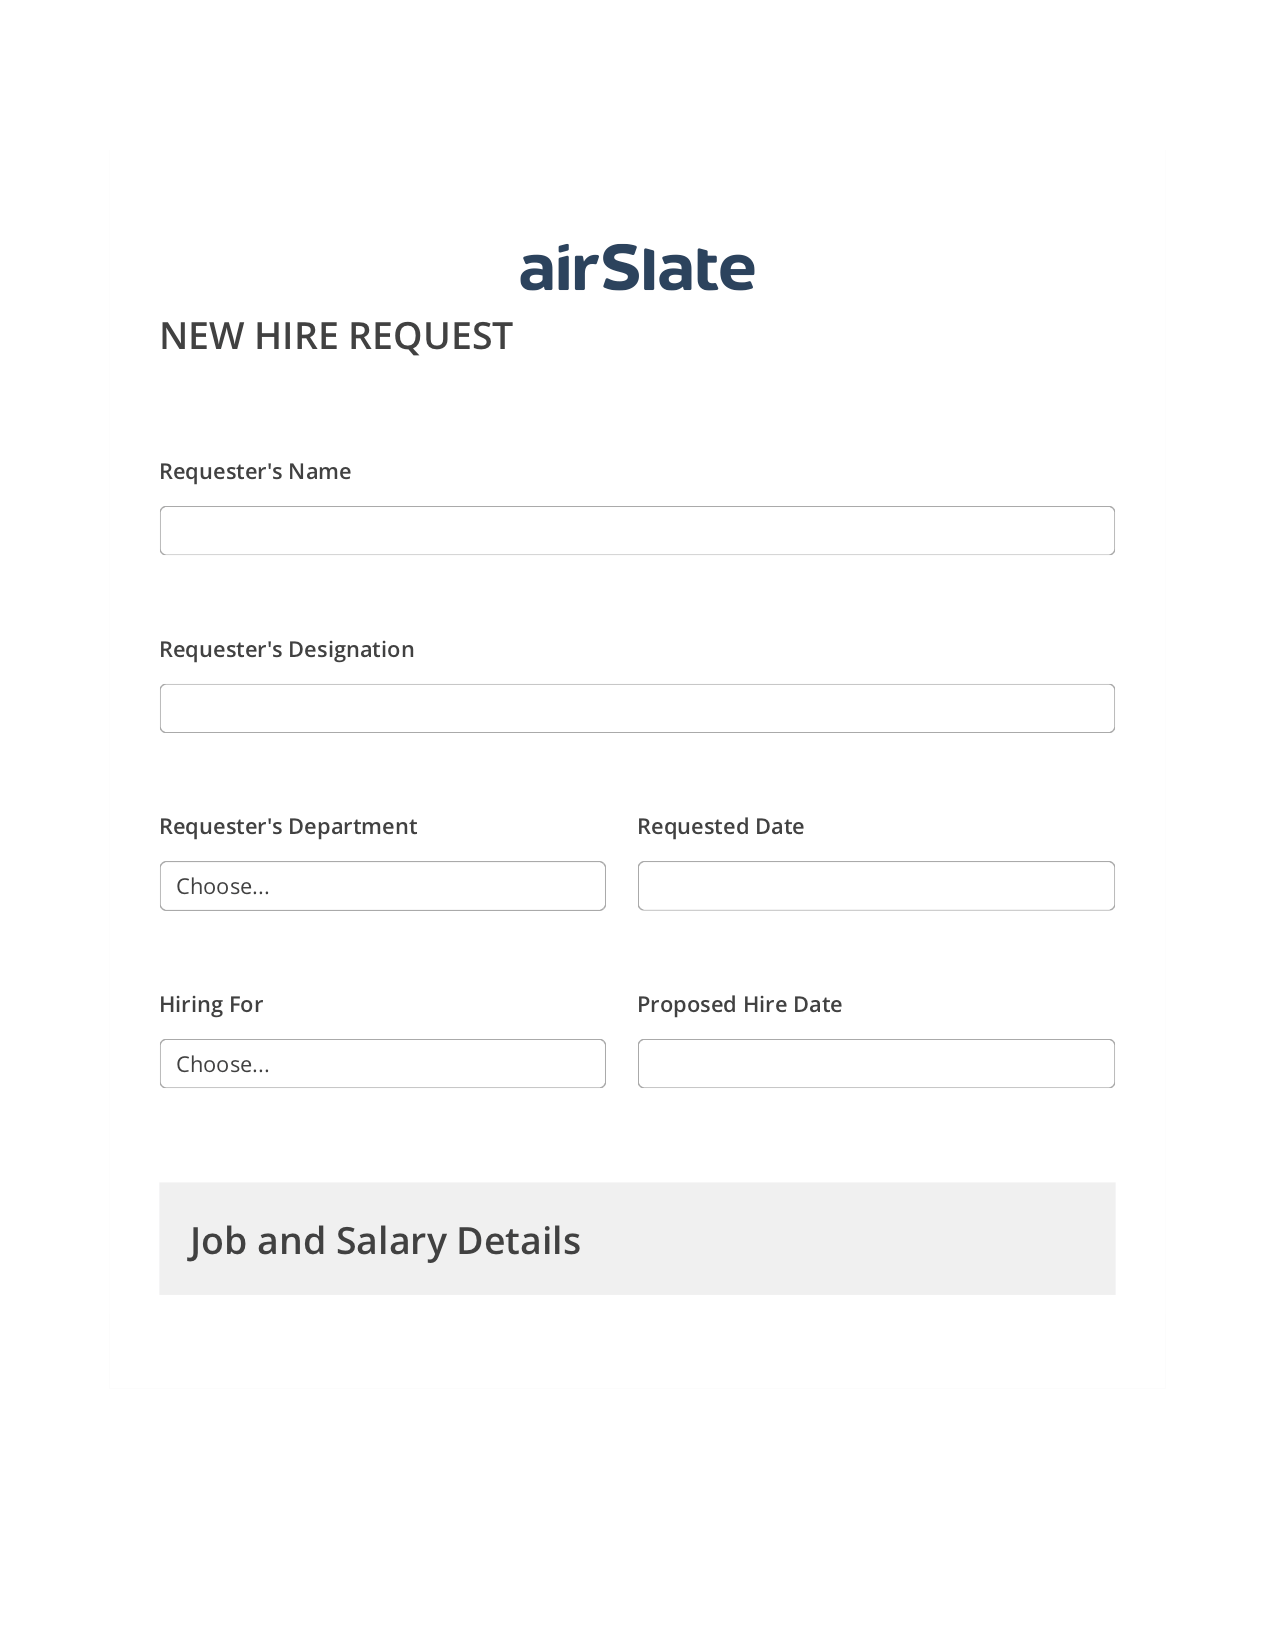 Hiring Request Workflow Pre-fill Dropdowns from MySQL Bot, Unassign Role Bot, Export to Google Sheet Bot